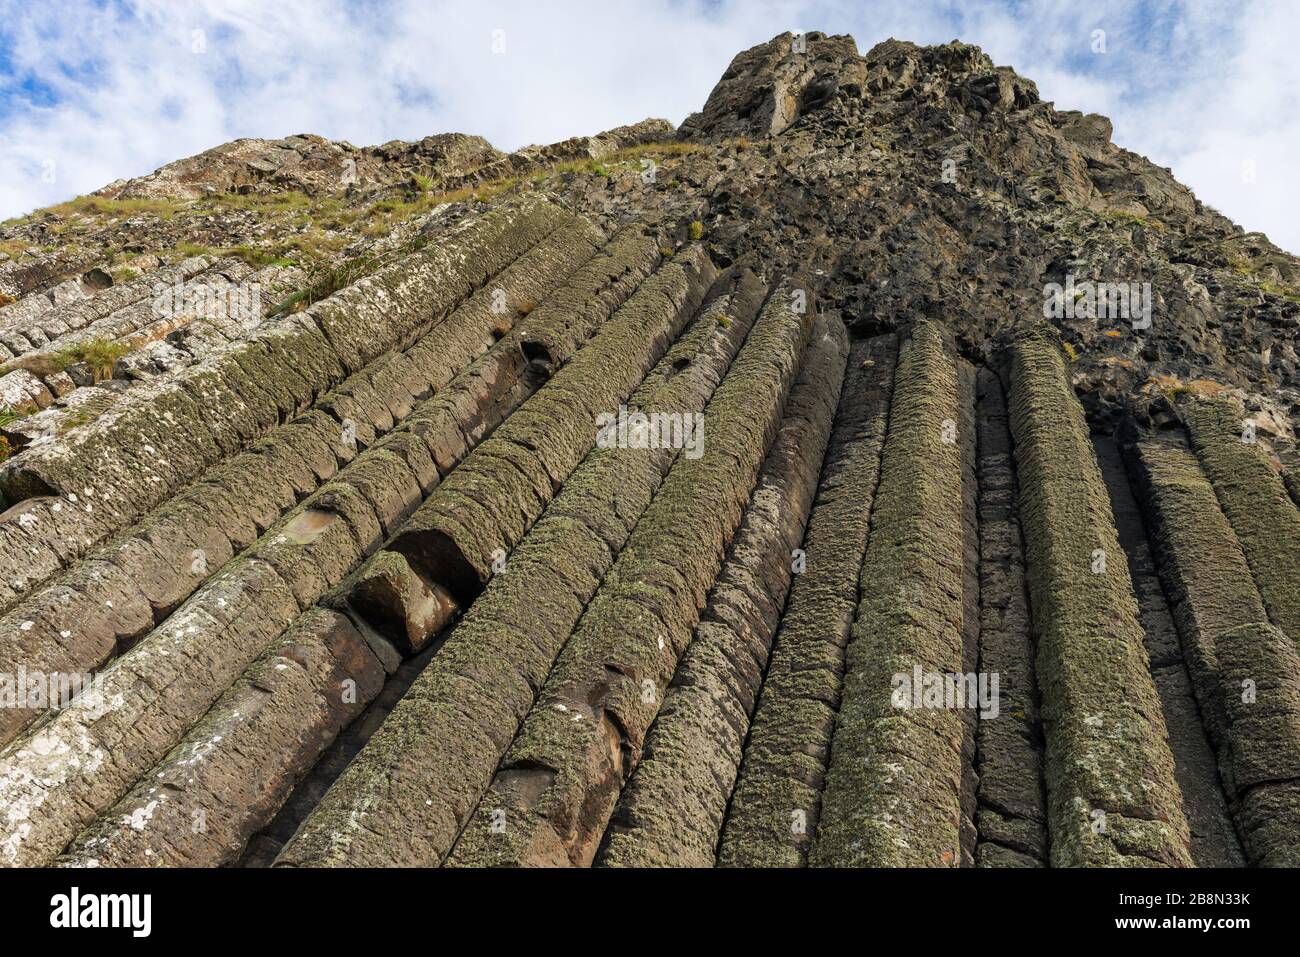 The "Organ Pipes", basalt columns, in the cliff face, were formed by volcanic action.  Giant's Causeway and Causeway Coast, Northern Ireland, UK. Stock Photo